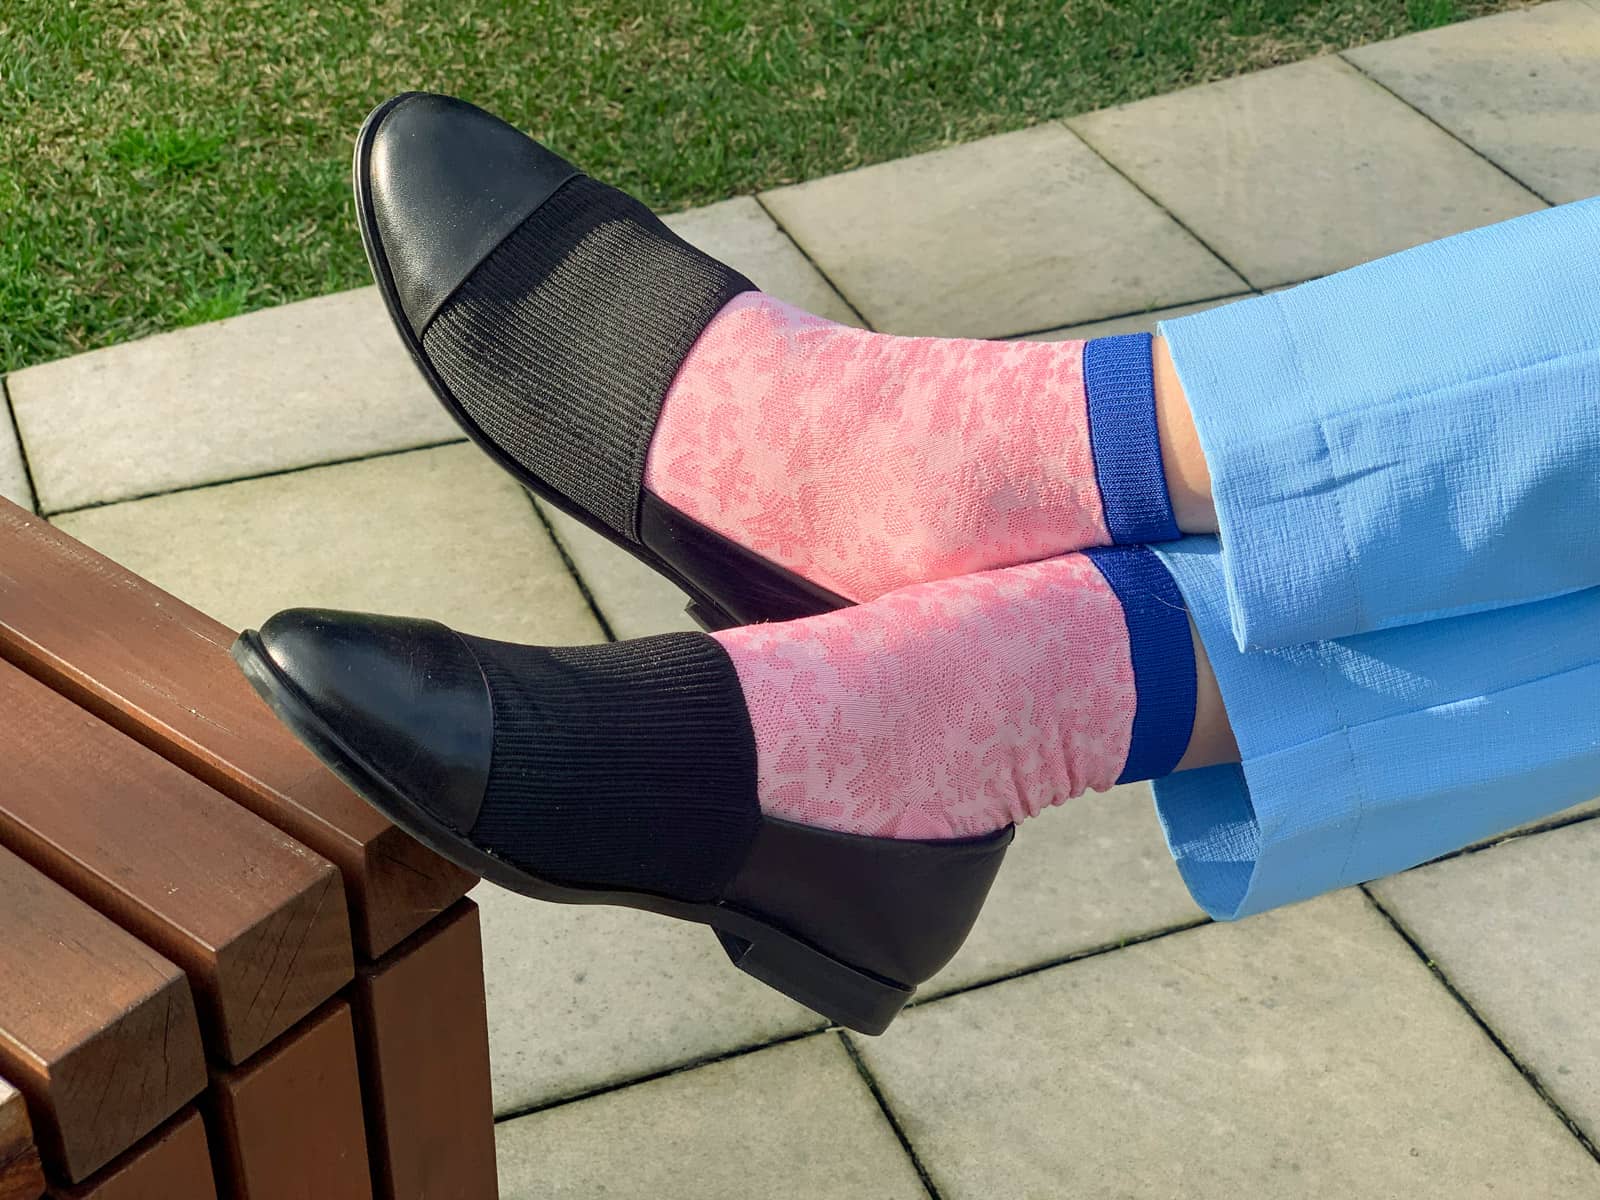 A close-up of a woman’s feet wearing pink socks with a splatter texture, with blue top edges. She is wearing black loafers on her feet that have a knitted area covering the top part of the loafer